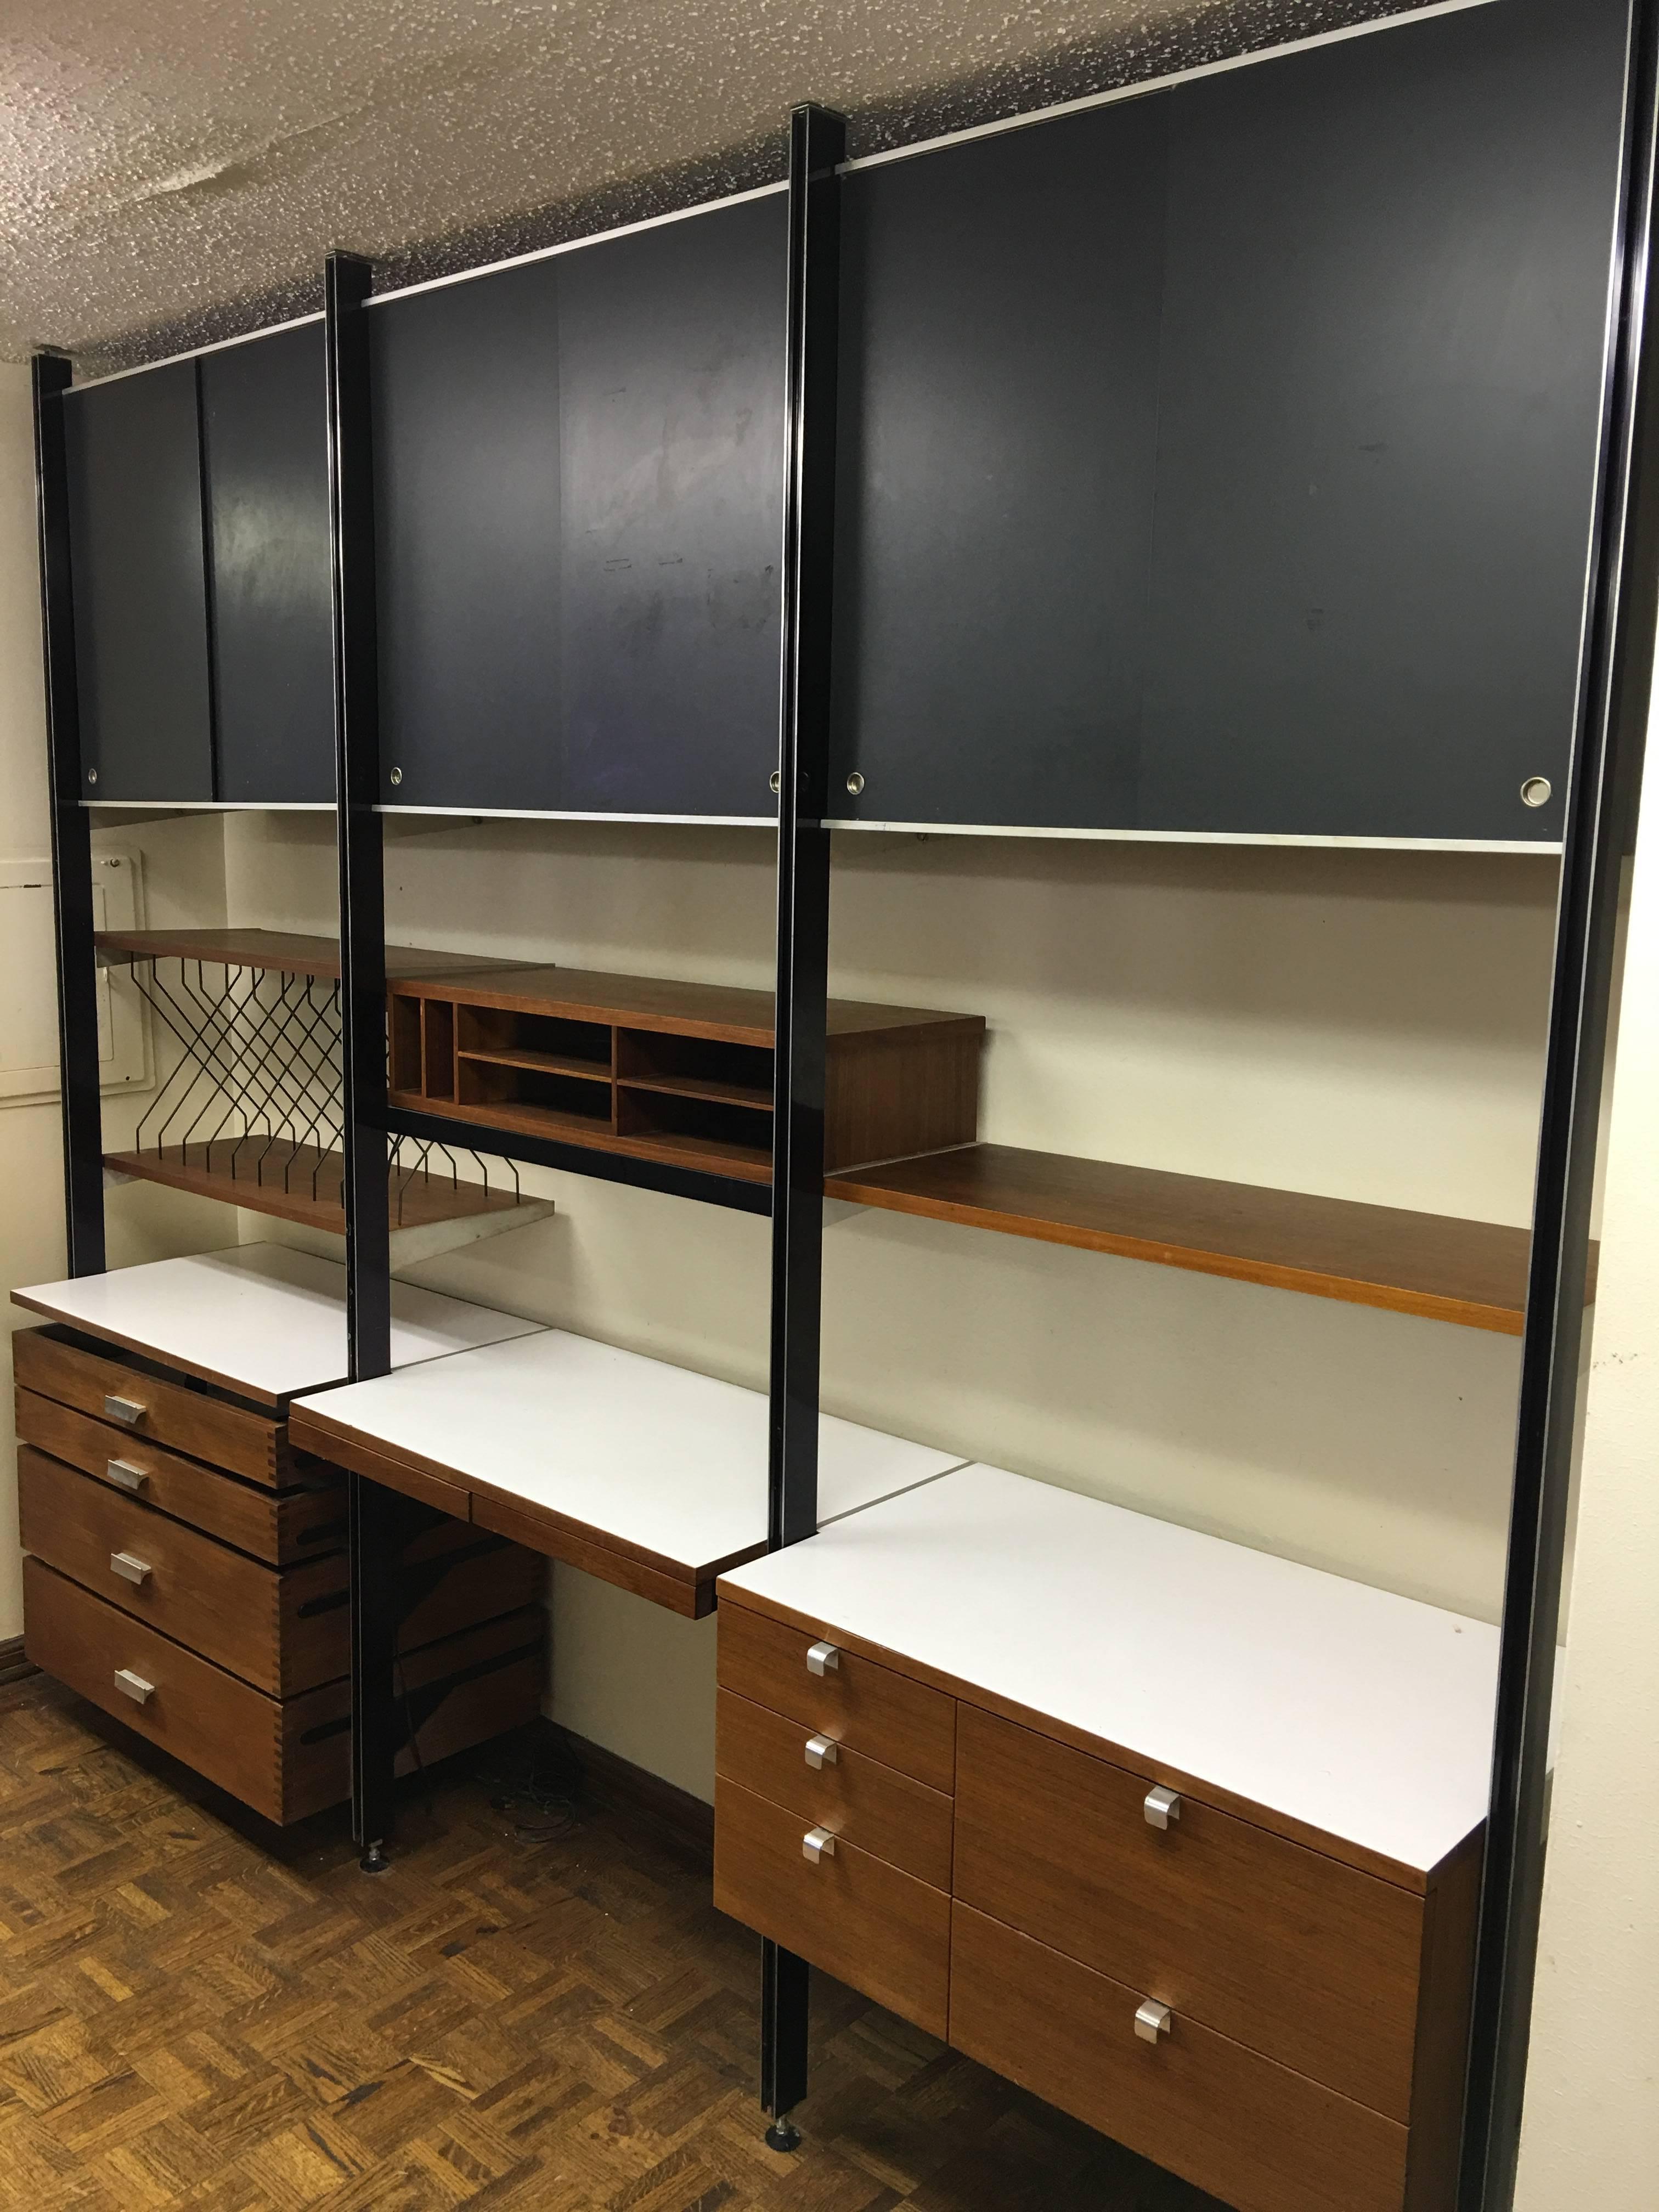 This is an exceptional example of a George Nelson CSS Unit. It has all the bells and whistles! There are three sliding door cabinets across top with shelves within, and also side cover panels, so they are closed off. Top is solid for display to the